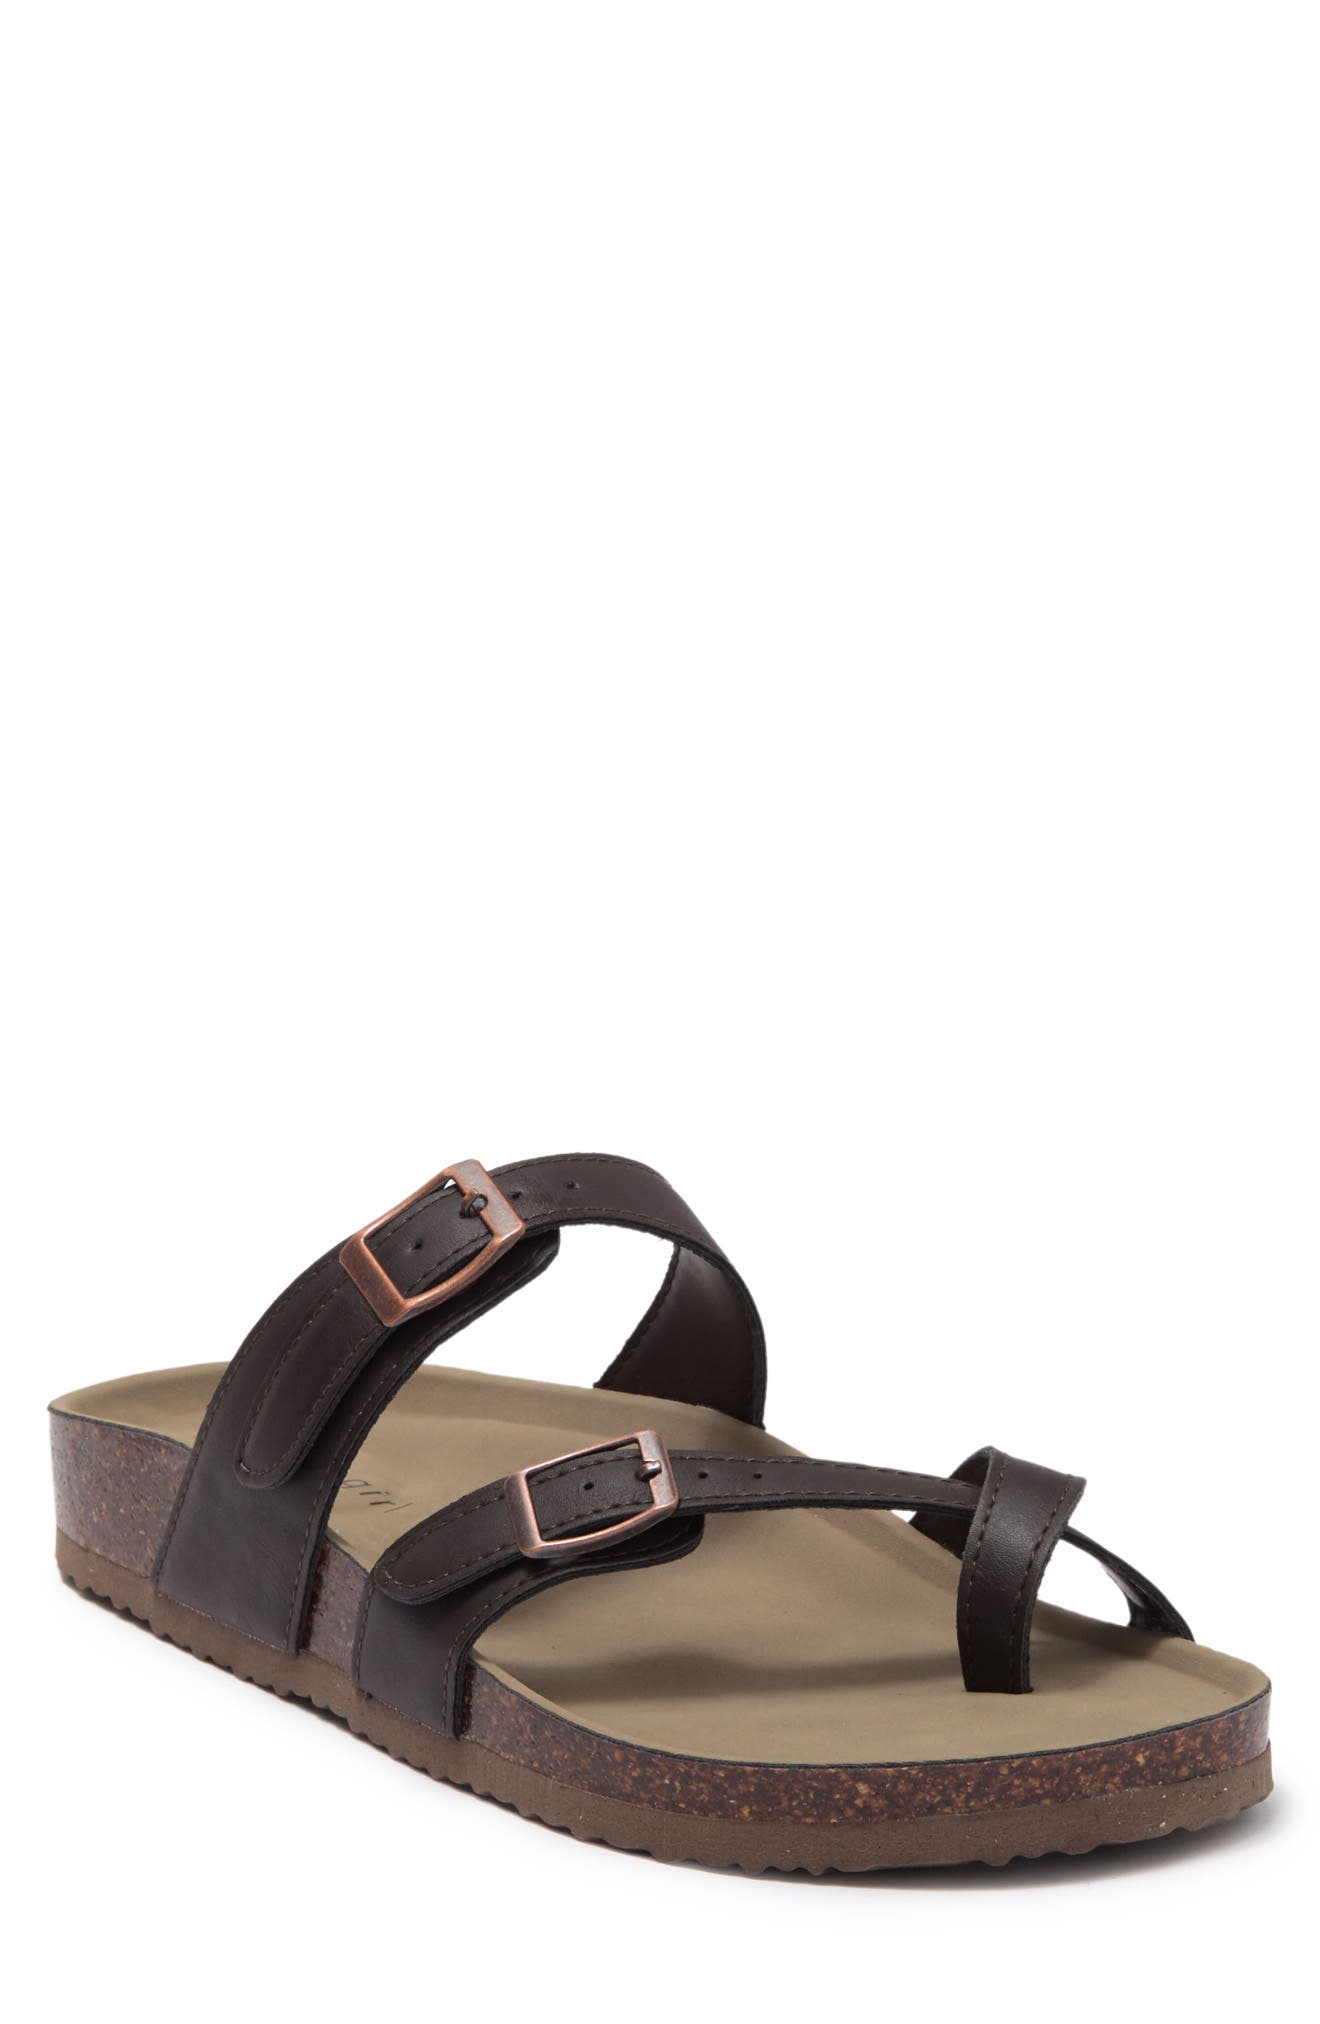 Madden Girl Bryce Sandal In Open Miscellaneous19